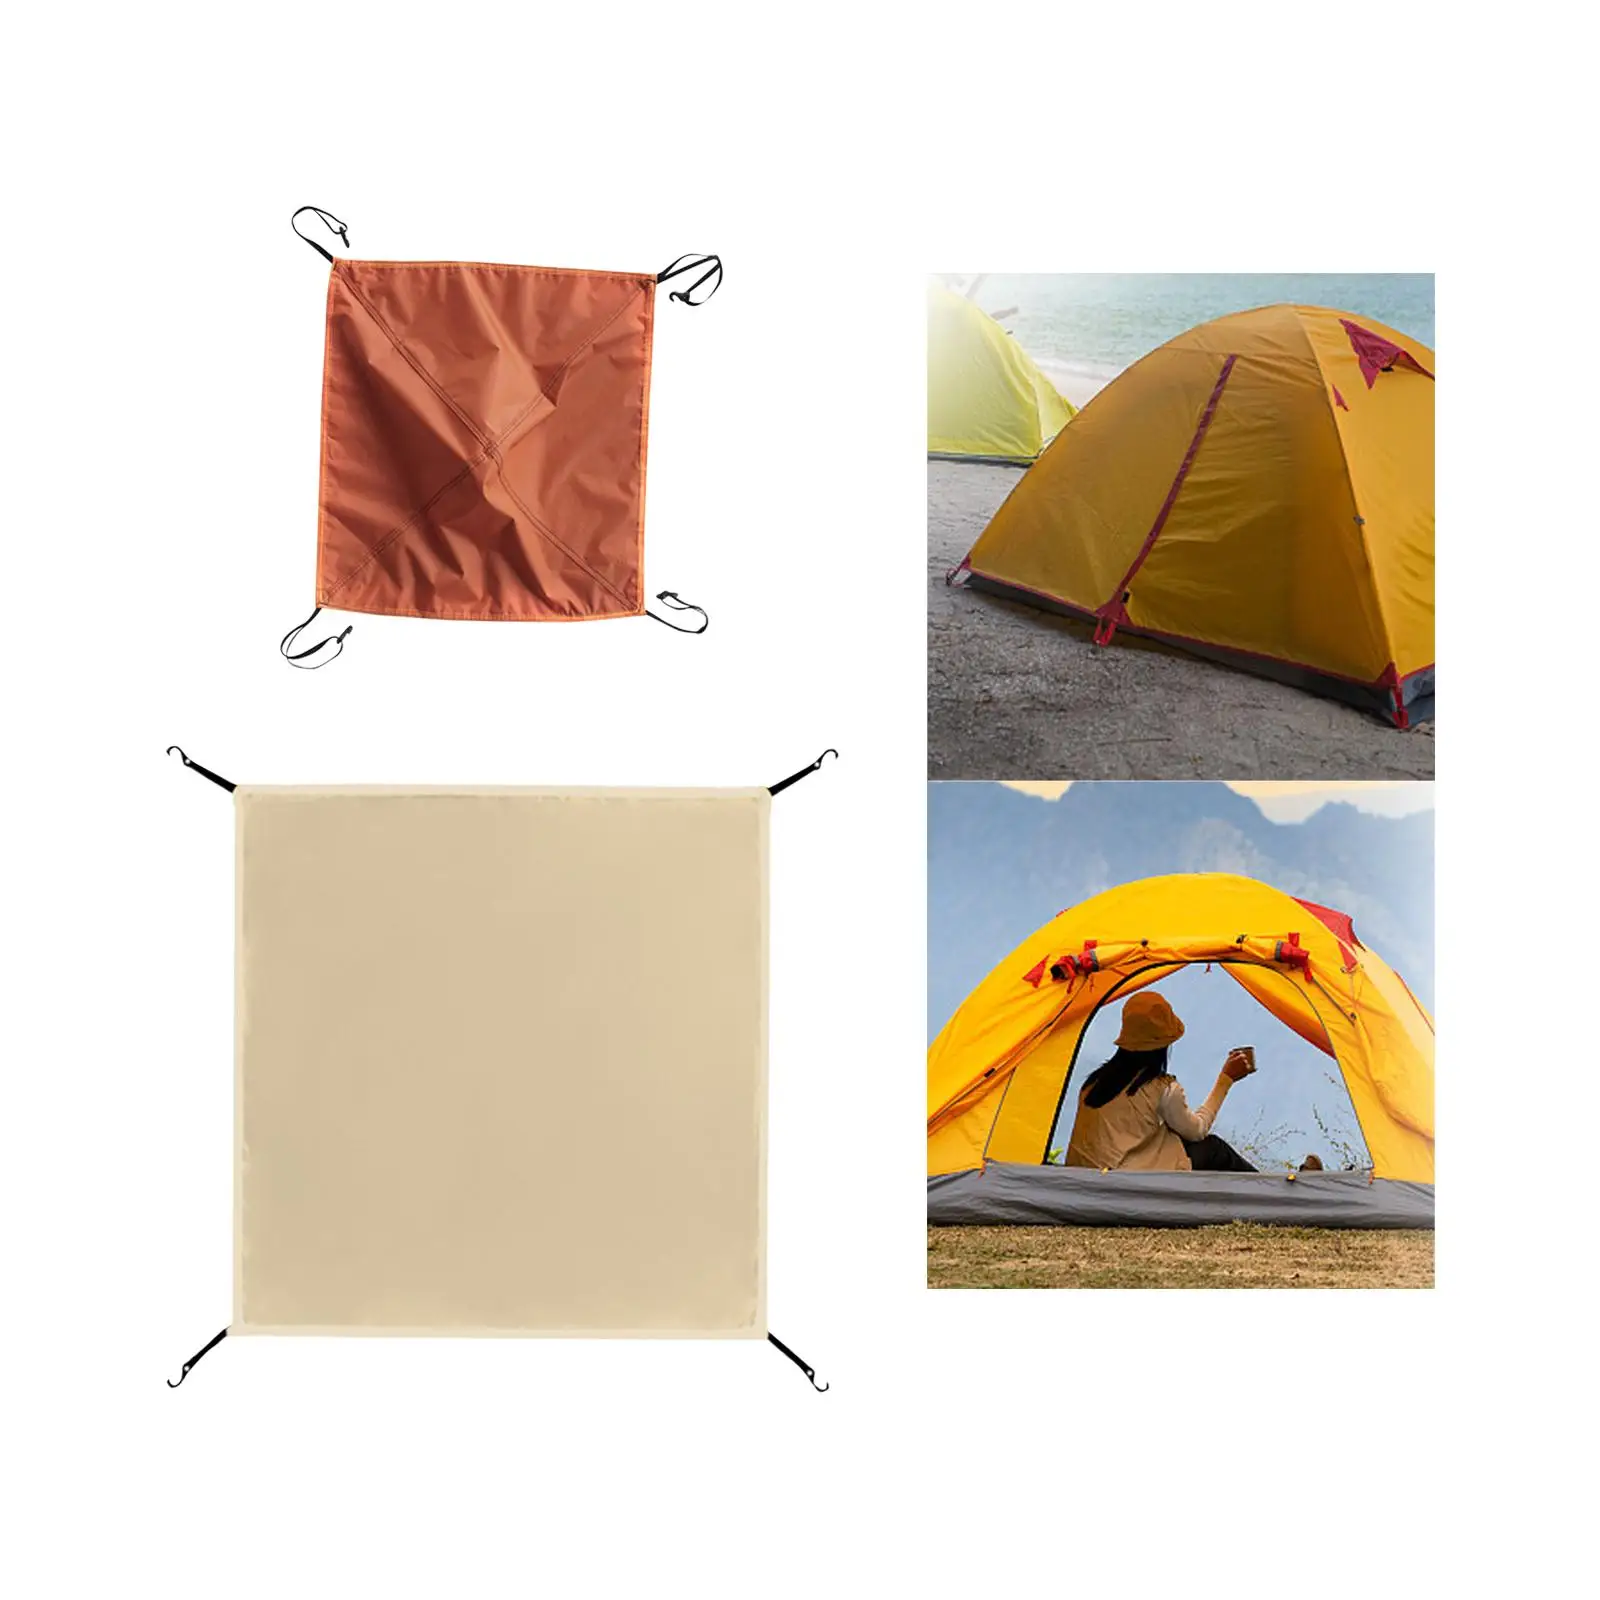 Dome Tent Cover Waterproof Foldable Tent Tarp Rain Fly Sun Protection Rain Cover Beach Tents Top Cover for Outdoor Backpacking